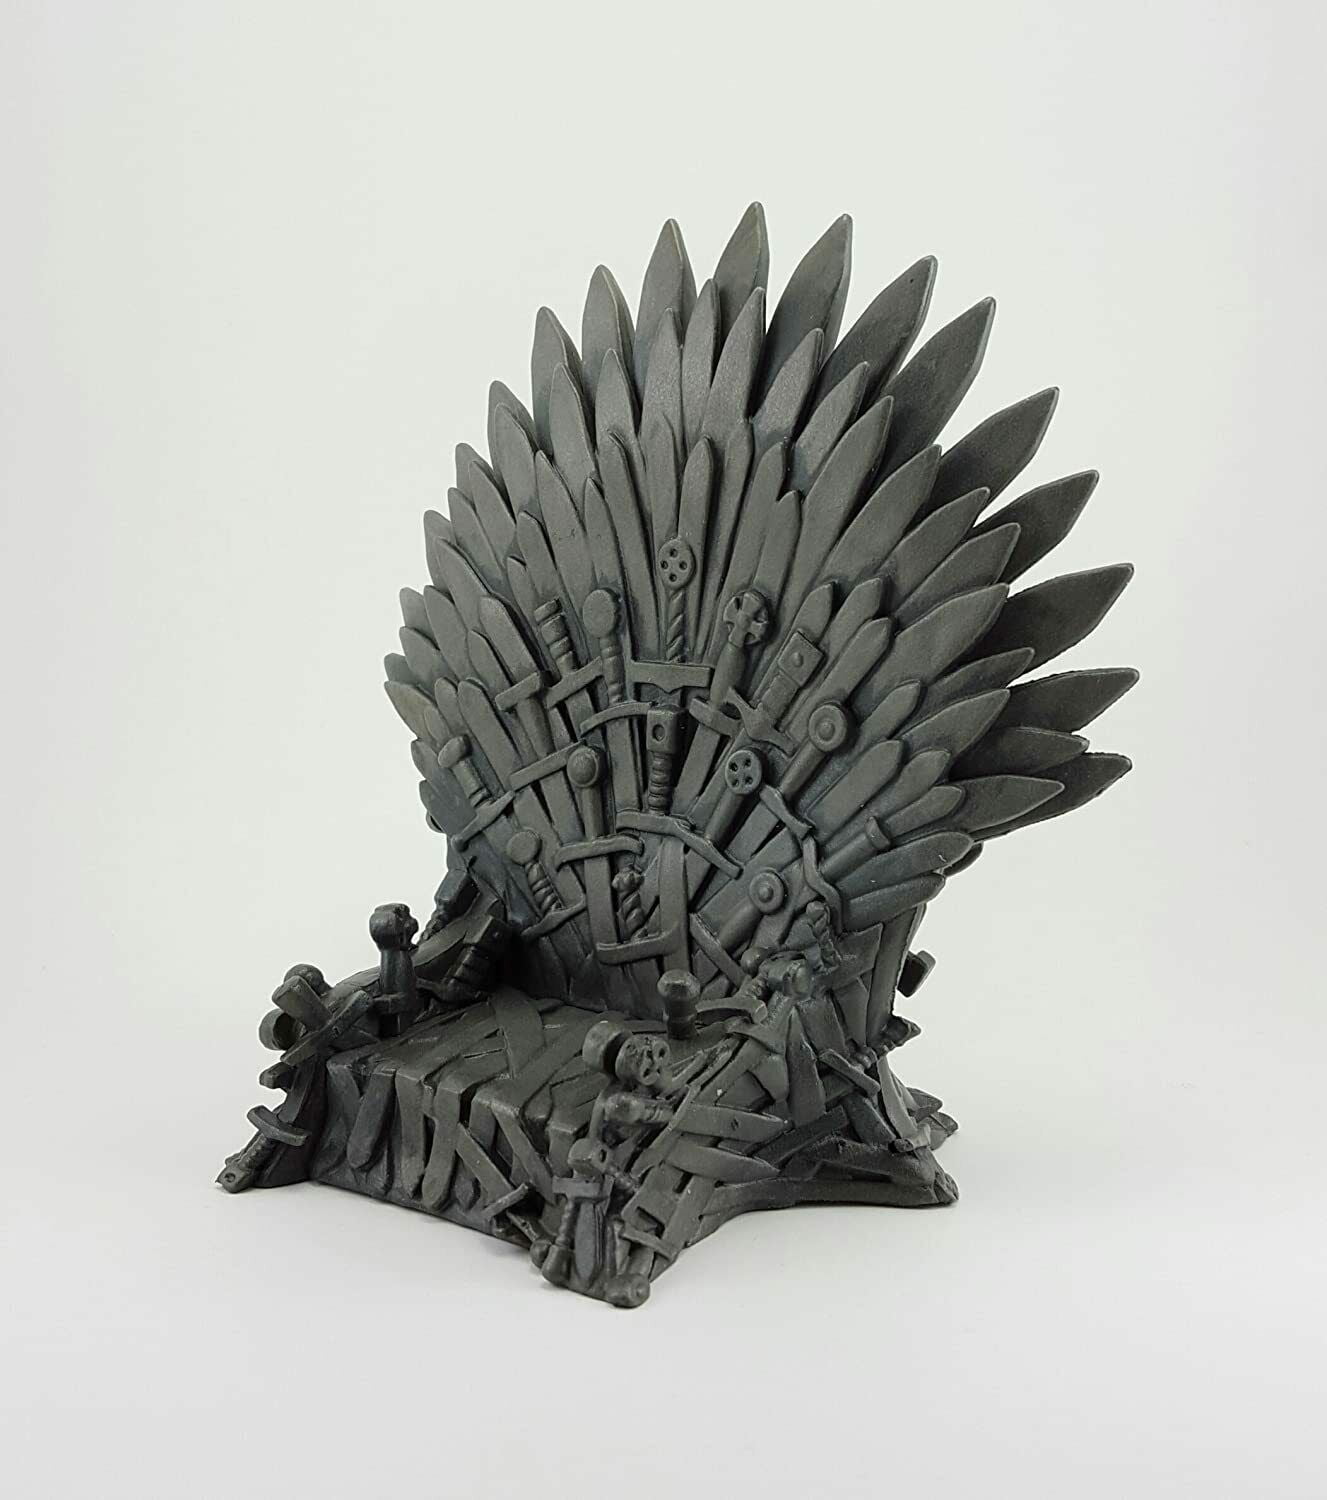 GAME OF THRONES The Iron Throne Figure Toys Sword Chair Desk 7''/12‘’ display 